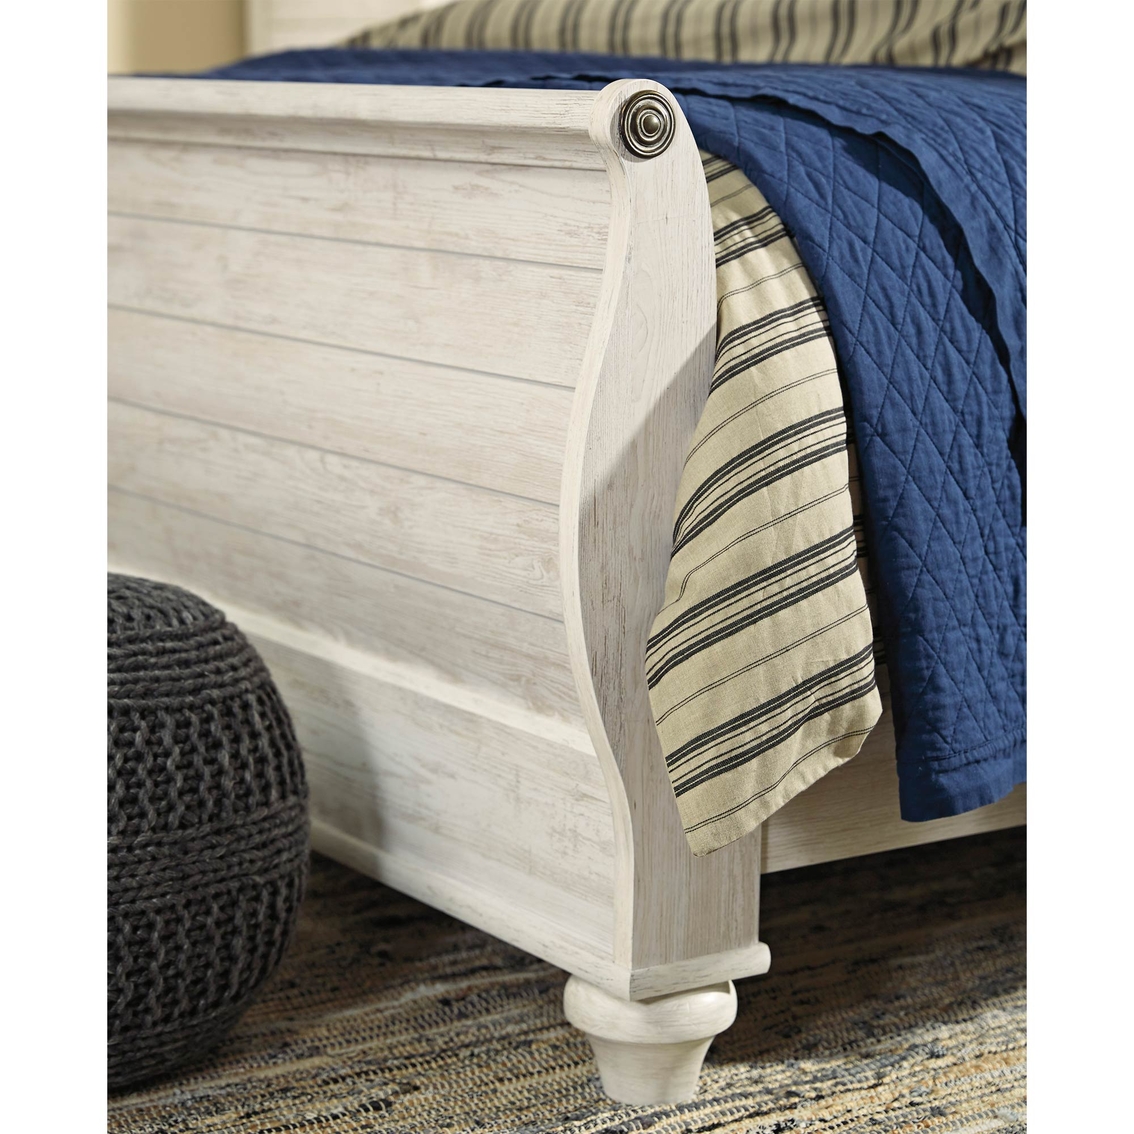 Signature Design by Ashley Willowton Sleigh Bed - Image 2 of 4